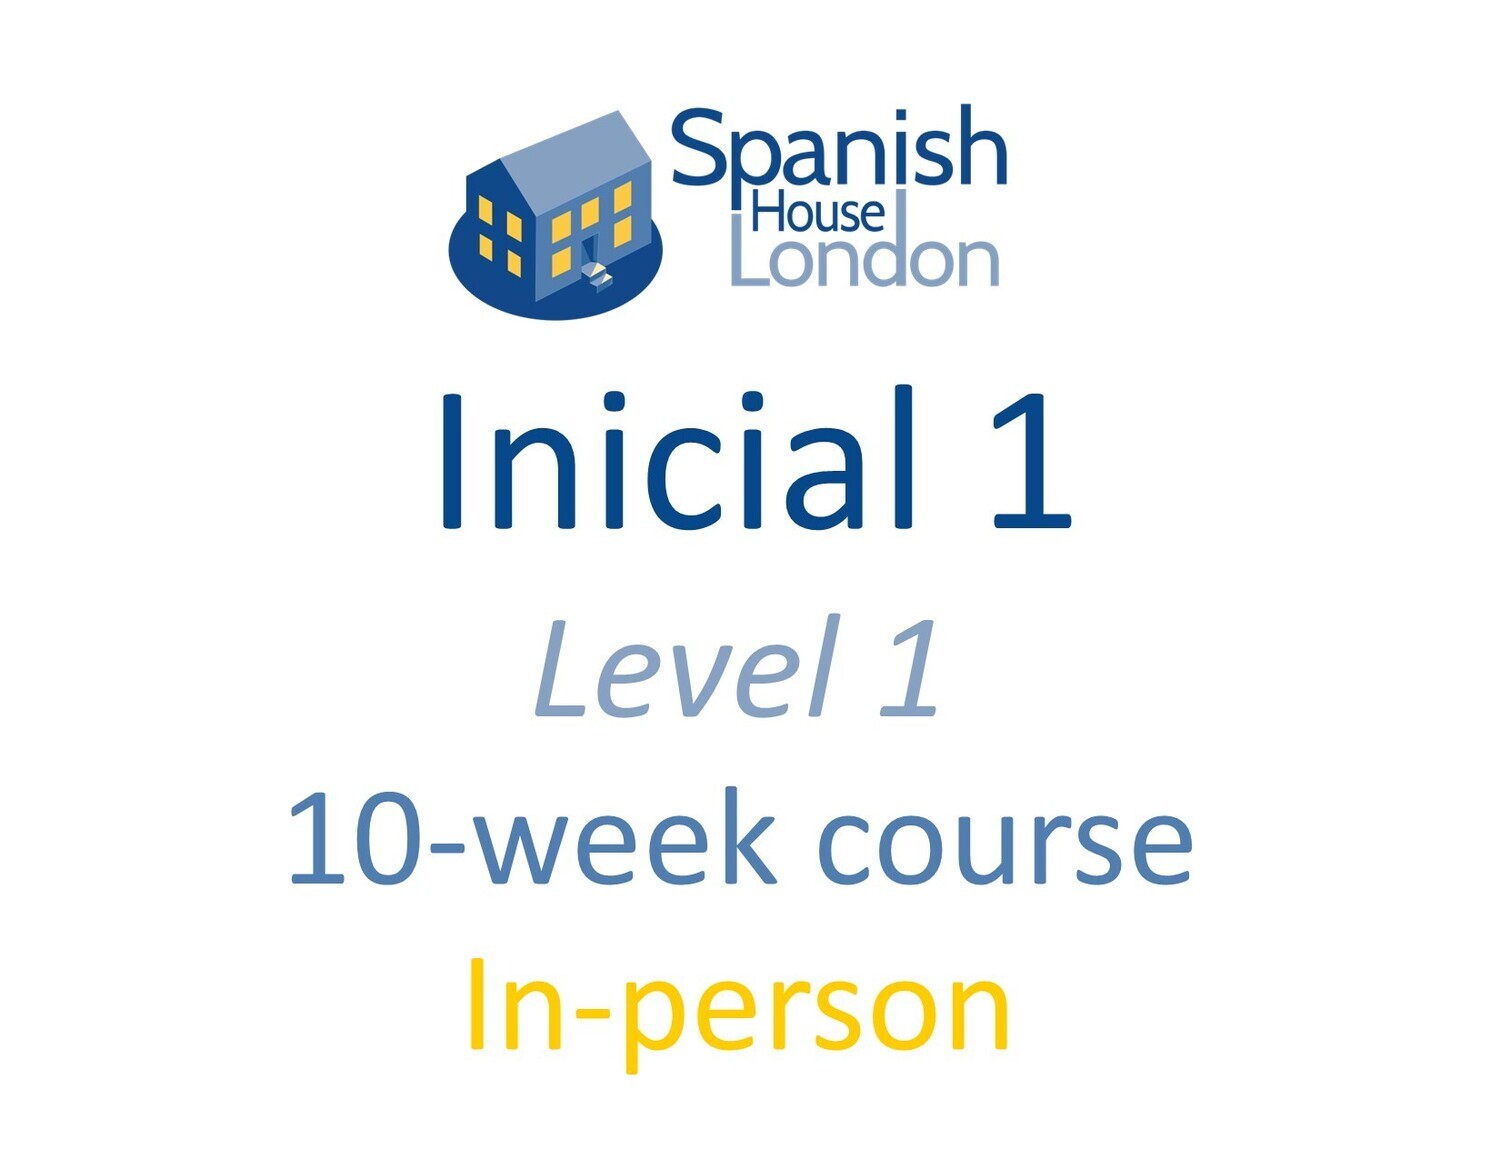 Inicial 1 Course starting on 26th March at 7.30pm in Clapham North